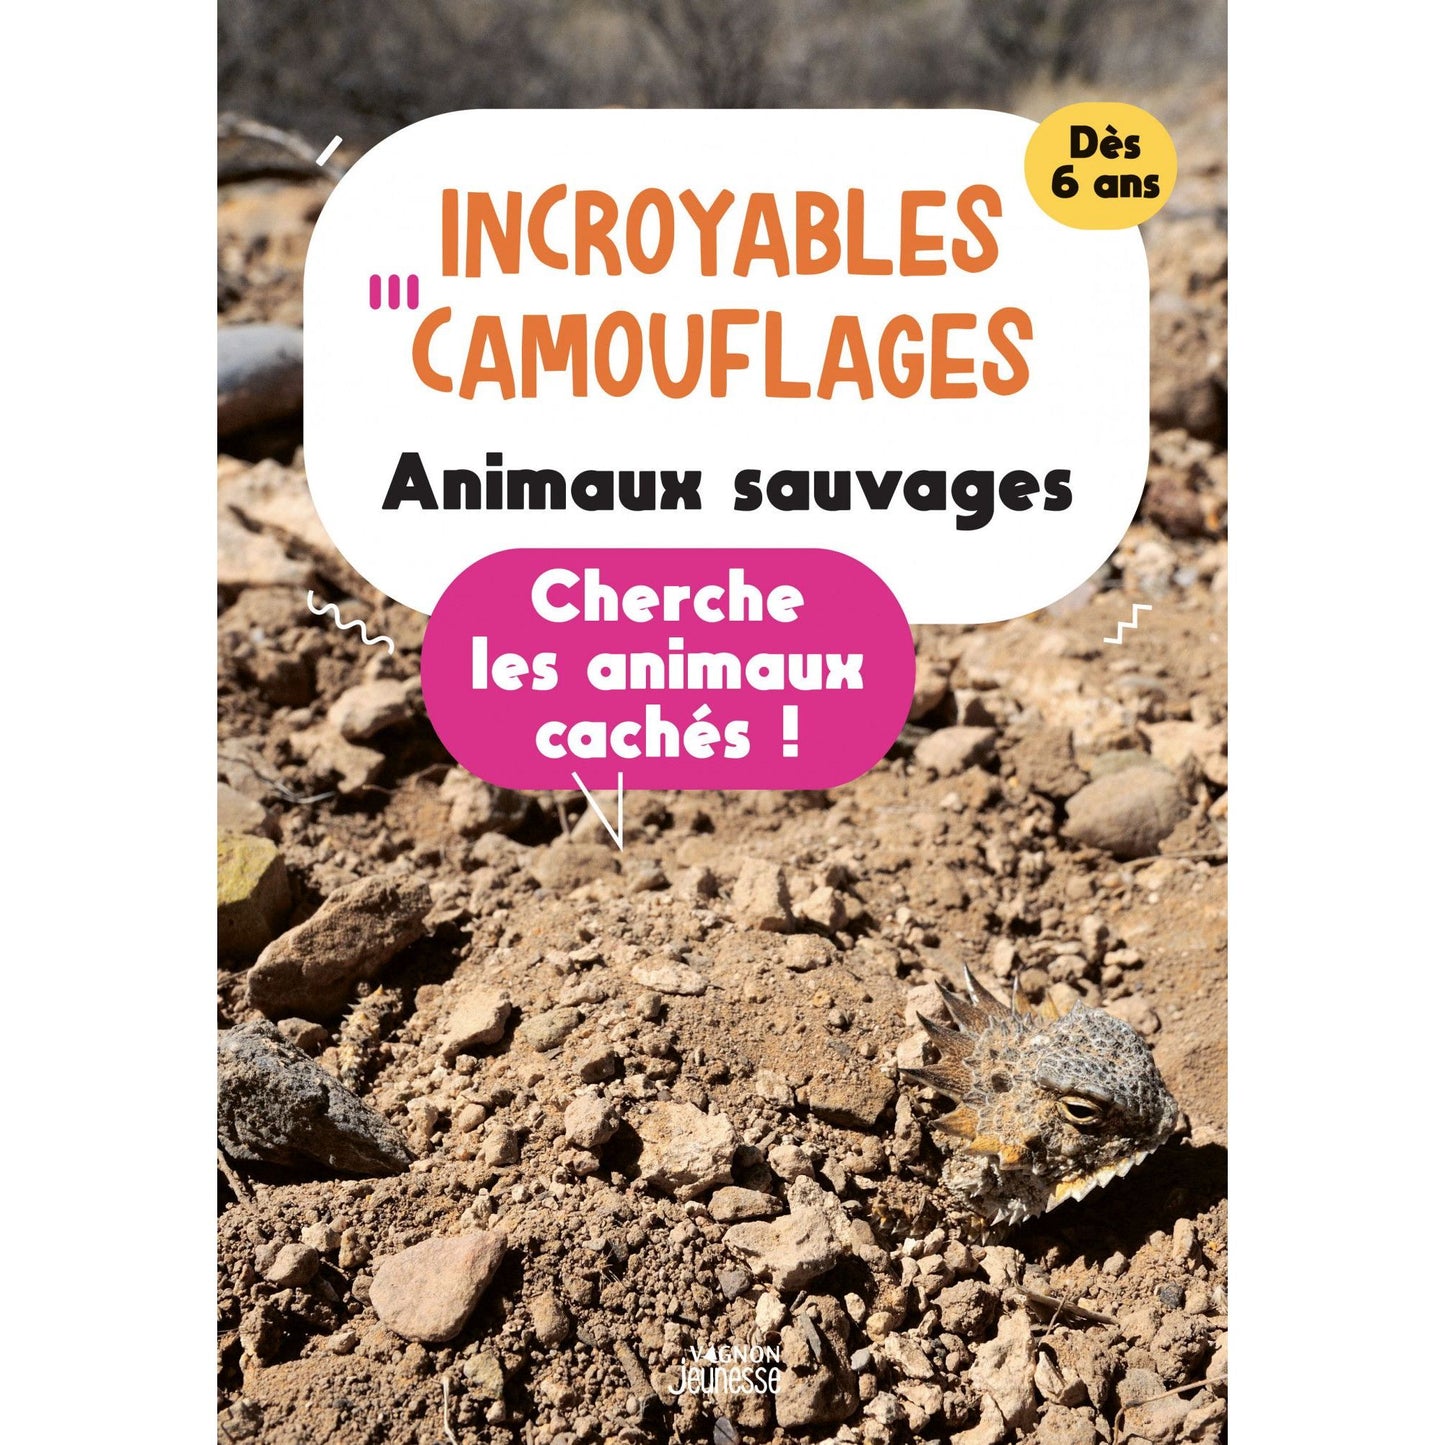 INCROYABLES CAMOUFLAGES : ANIMAUX SAUVAGES